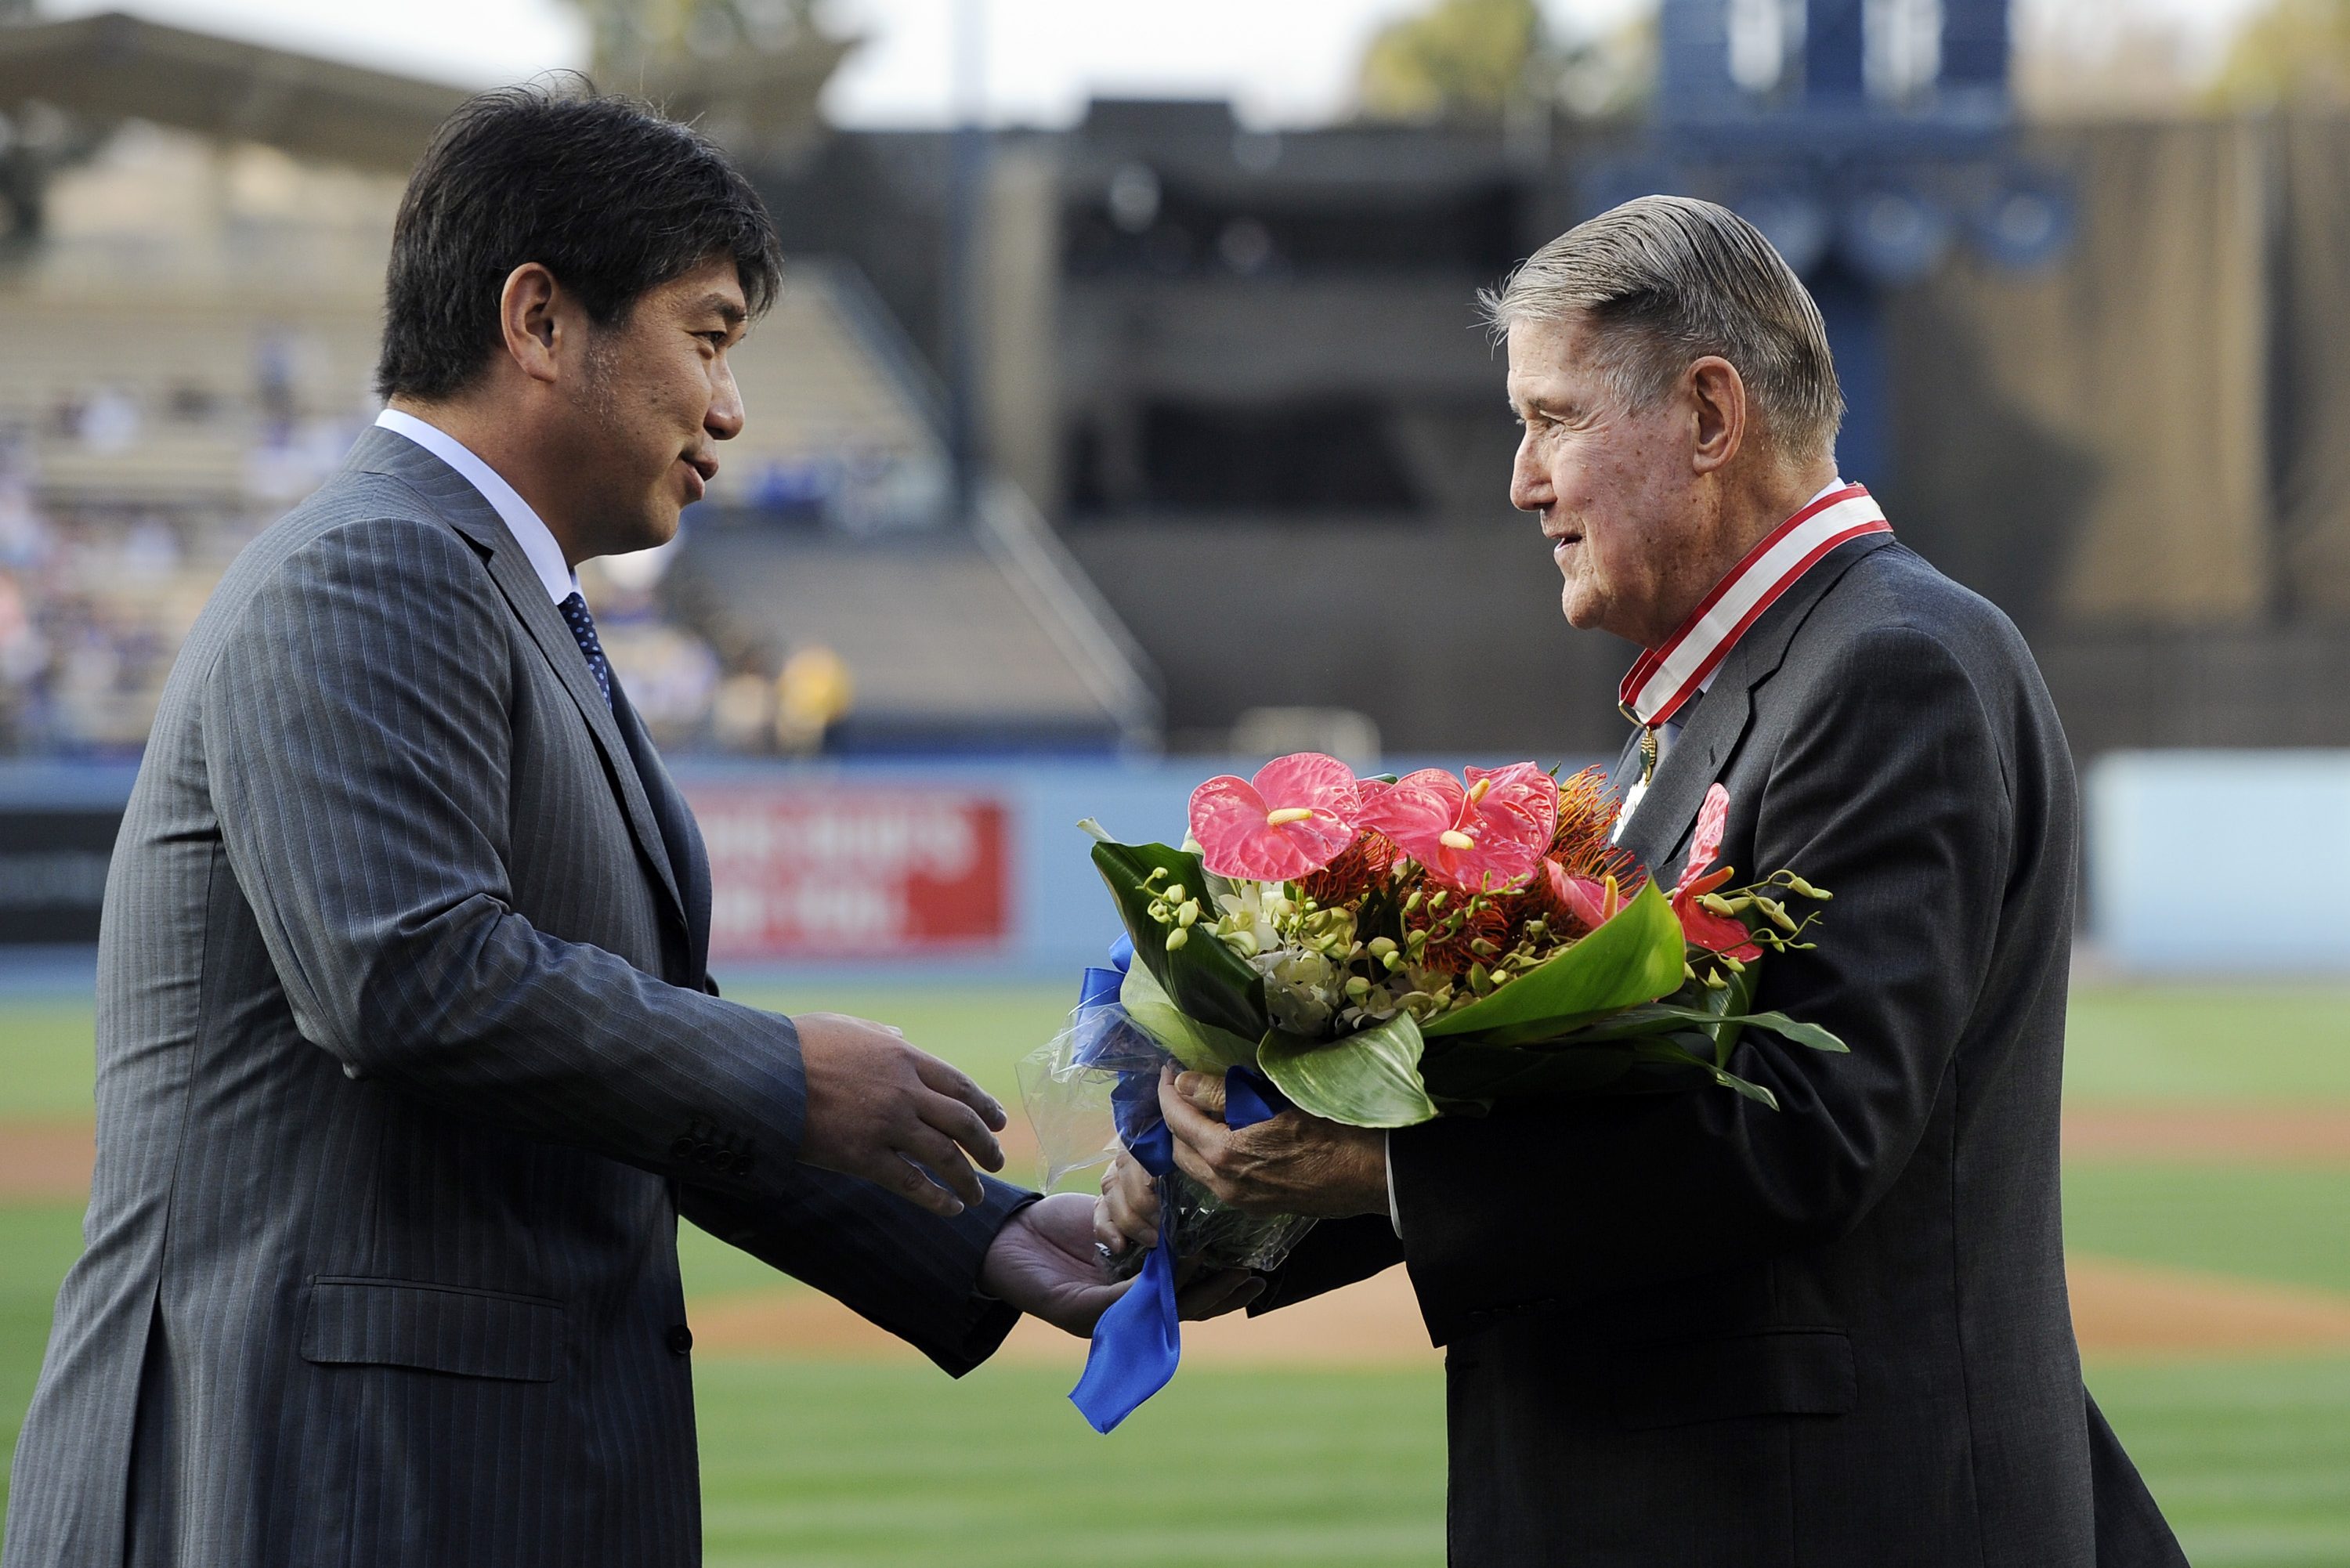 Former Los Angeles Dodgers pitcher Hideo Nomo, presents flowers to former Dodgers President Peter O'Malley (R) after he received The Order of the Rising Sun, Gold Rays with Neck Ribbon from Harry H. Horinouchi, consul general of Japan in Los Angeles, as part of Japan Night celebration at Dodger Stadium prior to the start of a baseball game between the Dodgers and the Philadelphia Phillies July 8, 2015 at Dodger Stadium in Los Angeles, California. (Photo by Kevork Djansezian/Getty Images)